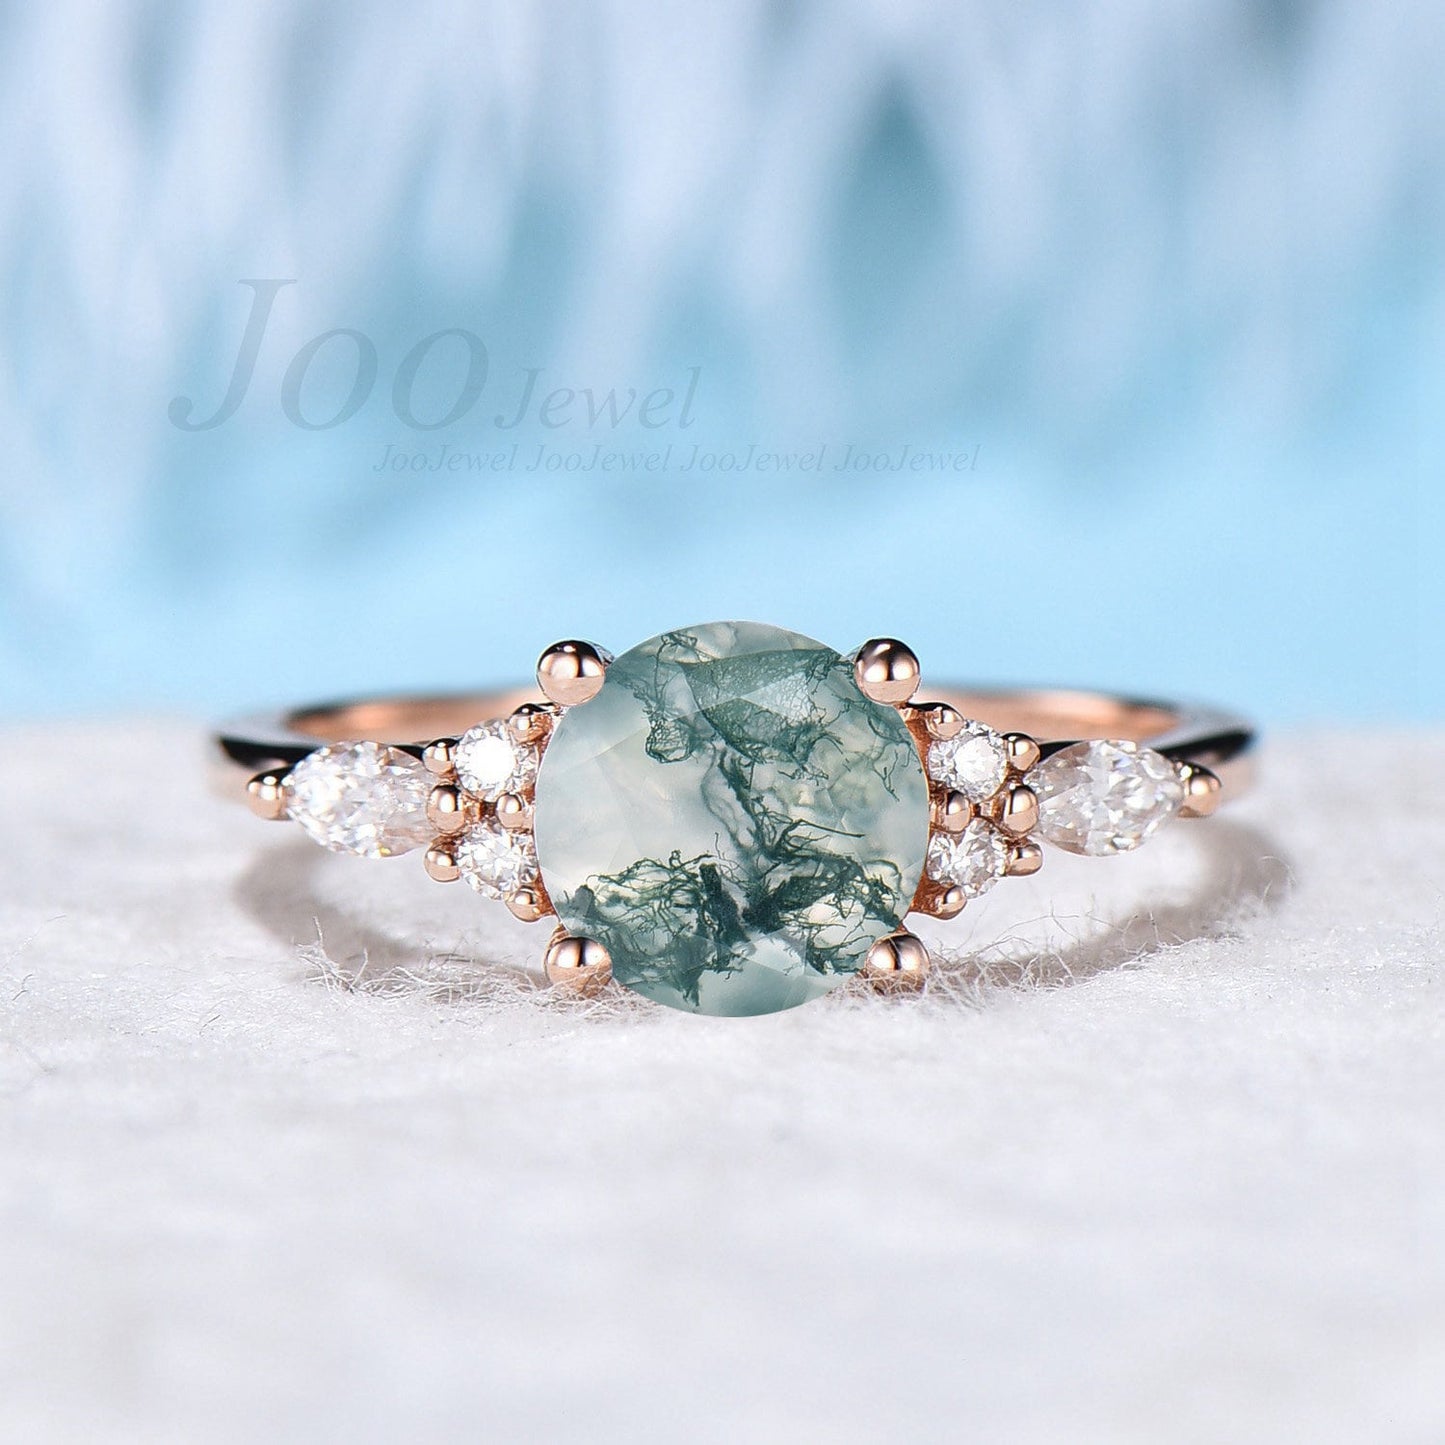 Round Shaped Natural Moss Agate Ring in Sterling Silver Unique Gemstone Wedding Ring 7mm Round Engagement Ring Woman Natural Healing Stones